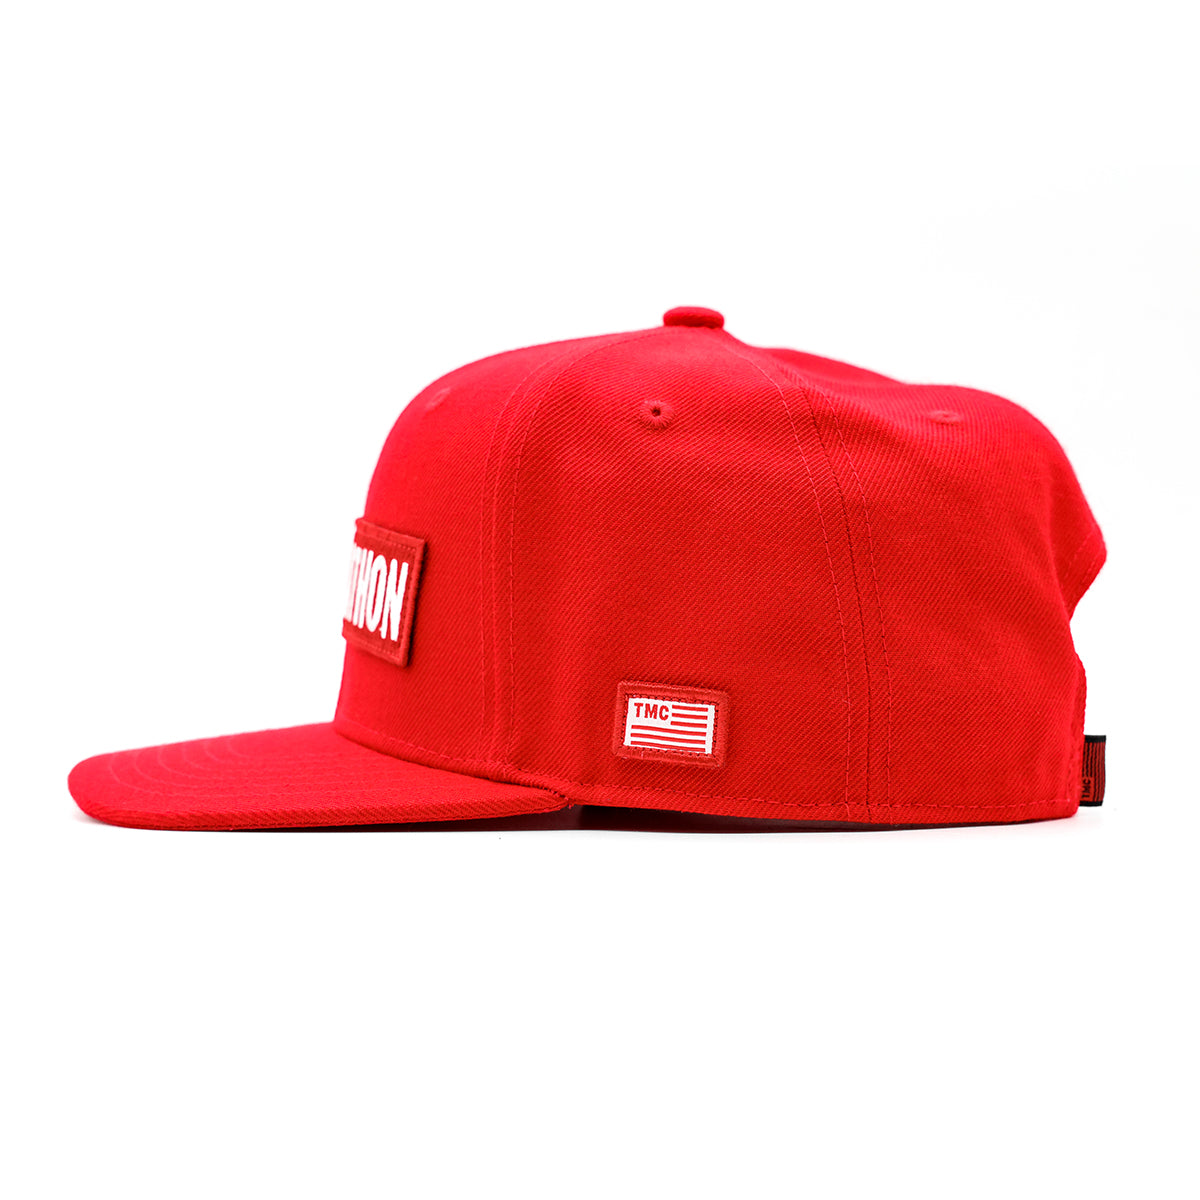 TMC Bar Limited Edition Snapback - Red - Side